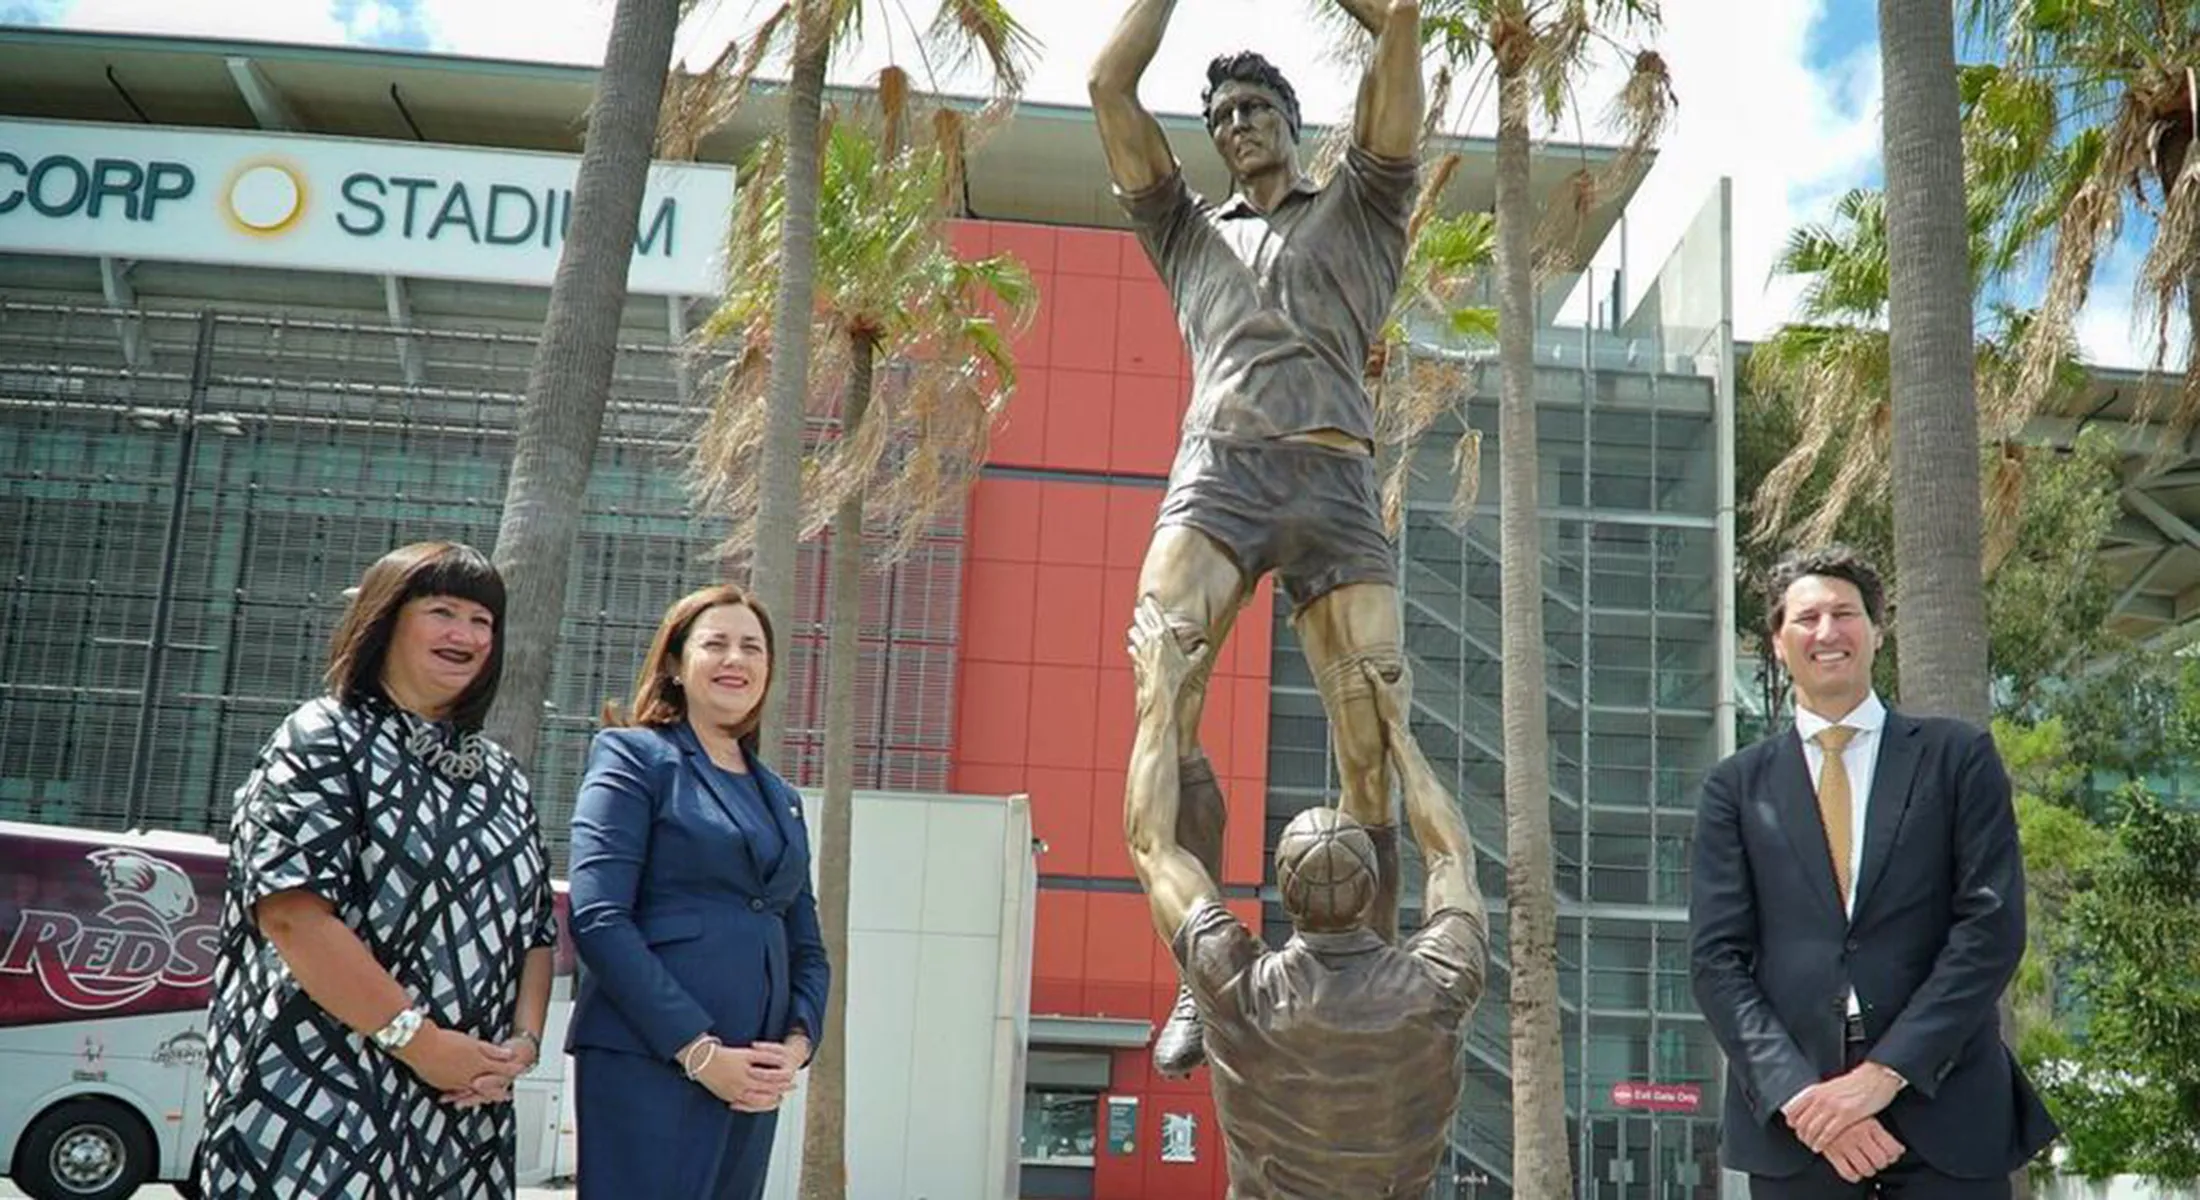 Queensland Premier Annastacia Palaszczuk, along with Rugby Australia CEO Raelene Castle, unveiling the tribute statue of John Eales.